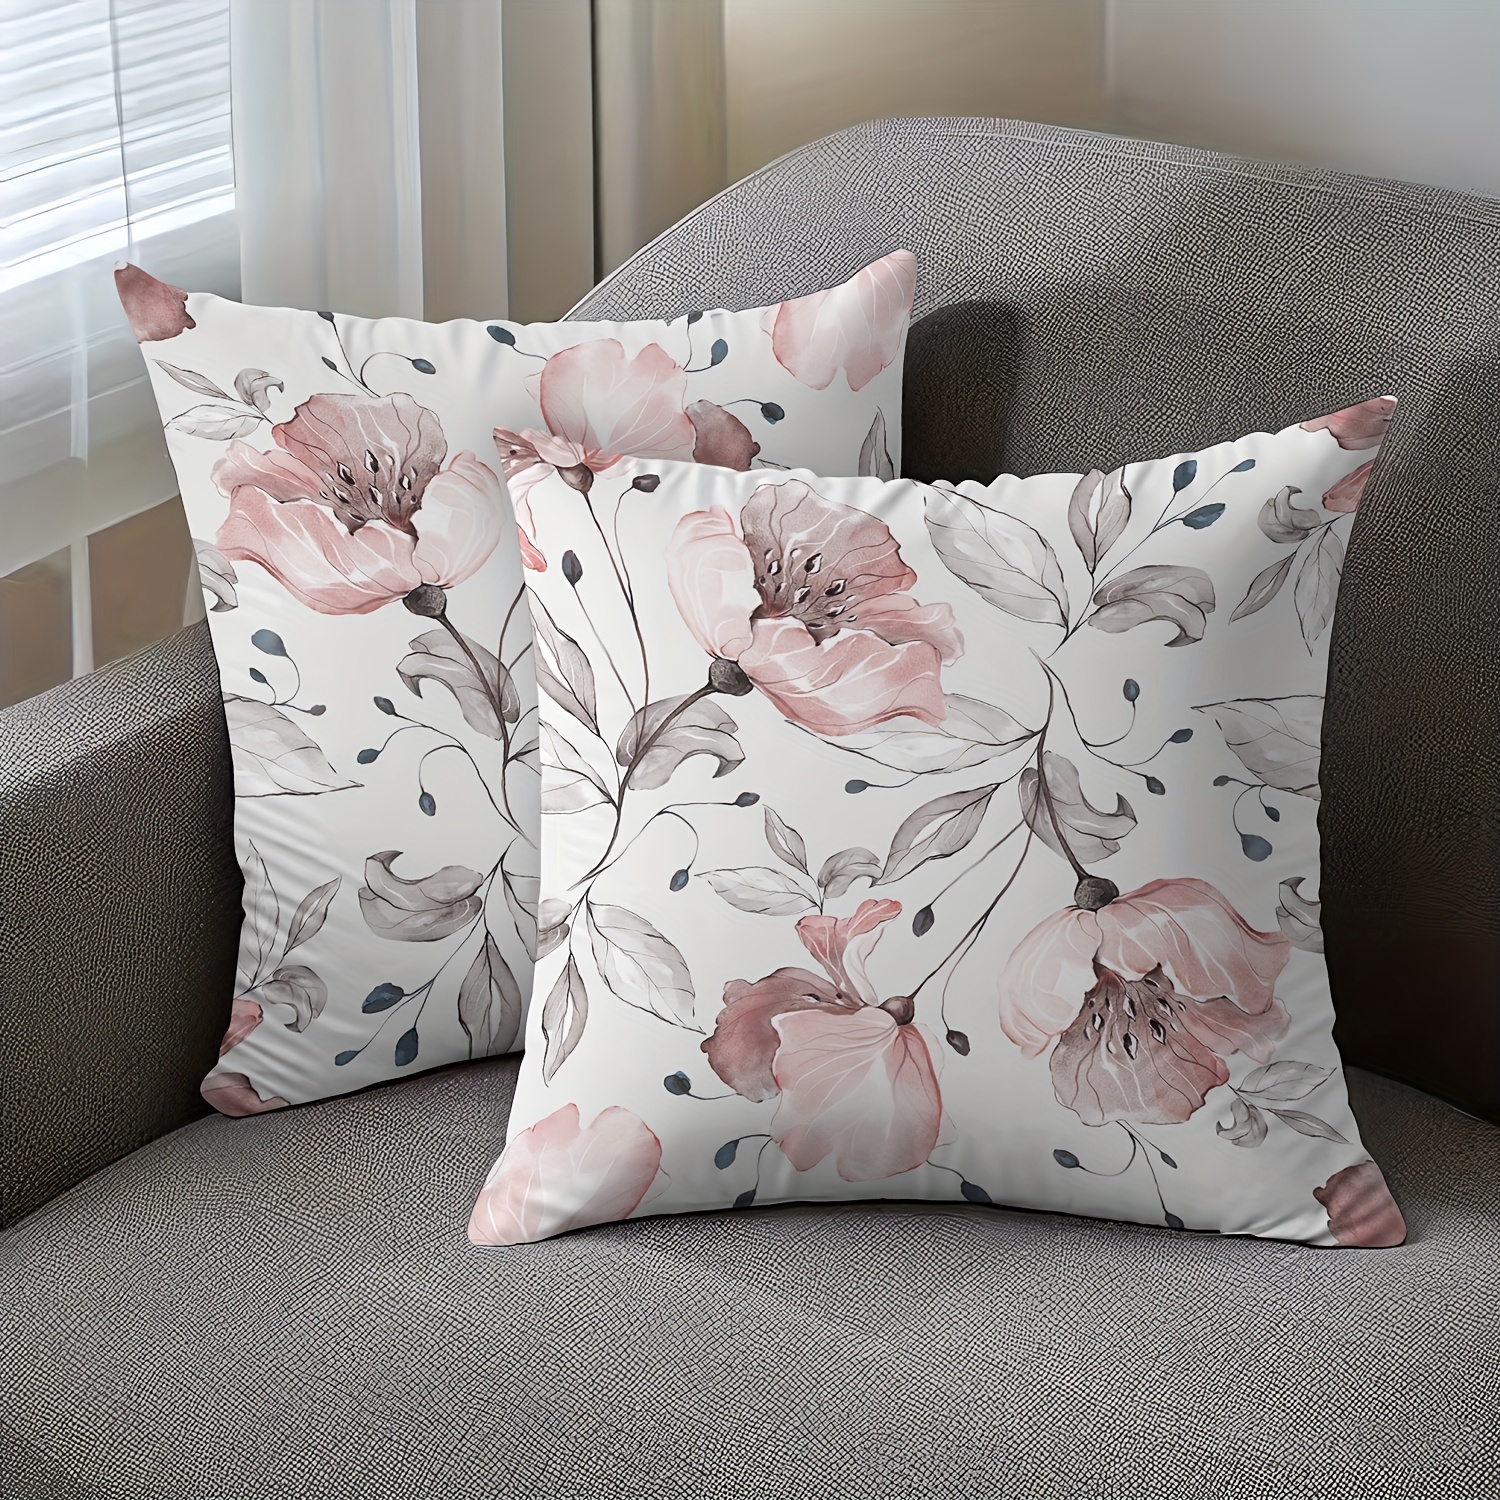 

2-piece Light Pink Floral Pillowcase And Pillowcase Minimalist Art Ins Modern Style Bedroom Living Room Home Decoration Short Plush Fabric Double-sided Printing No Pillow Core